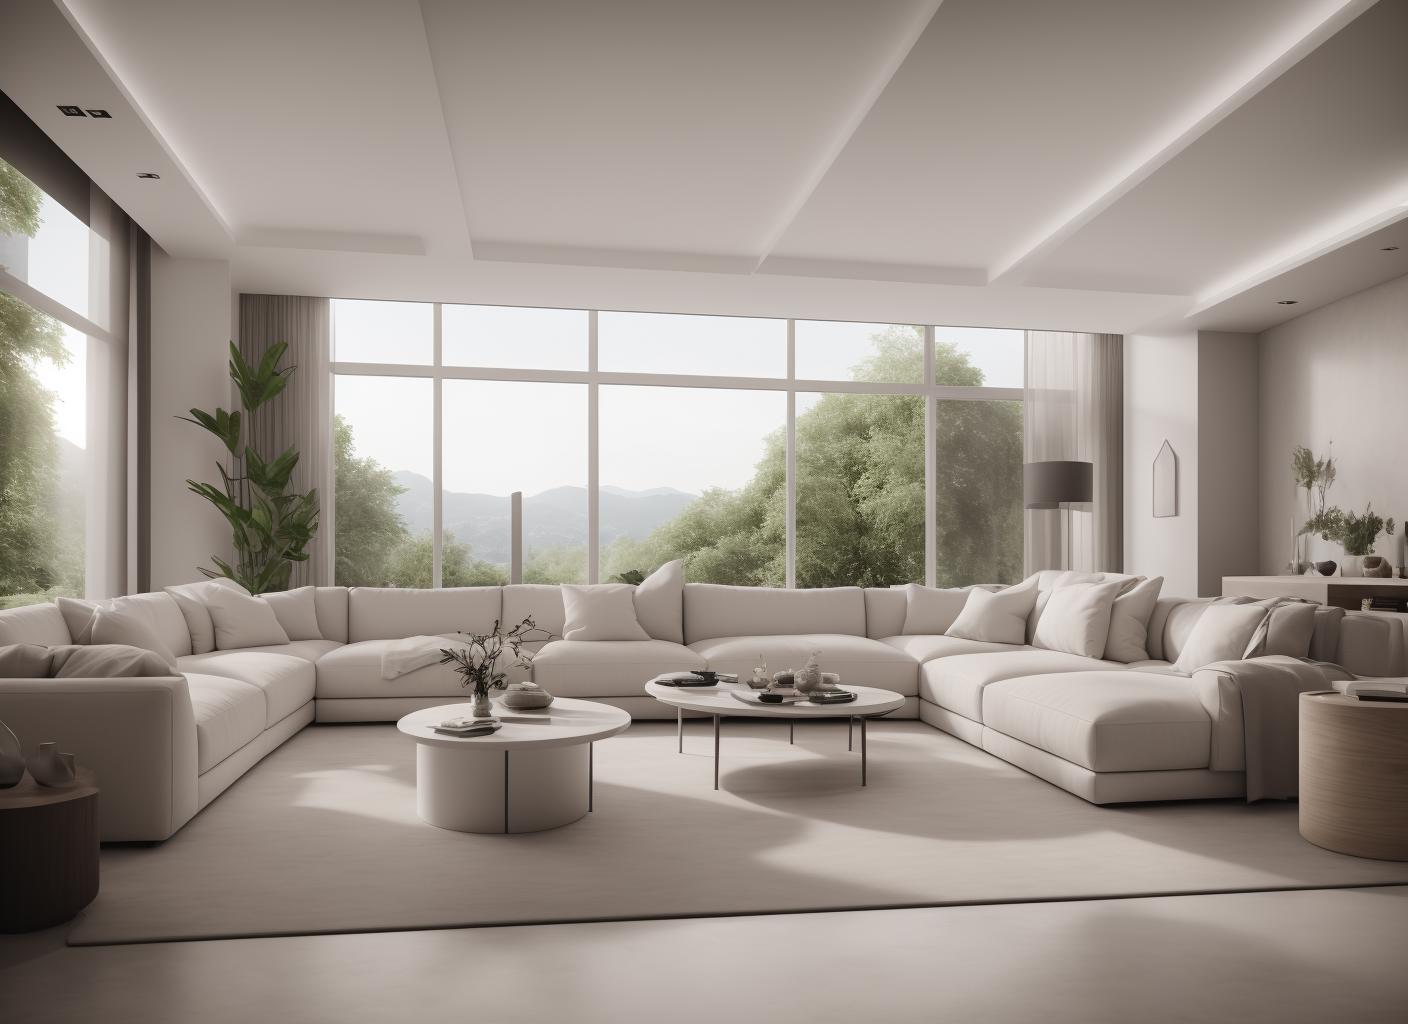 White living room with large windows and a round table.